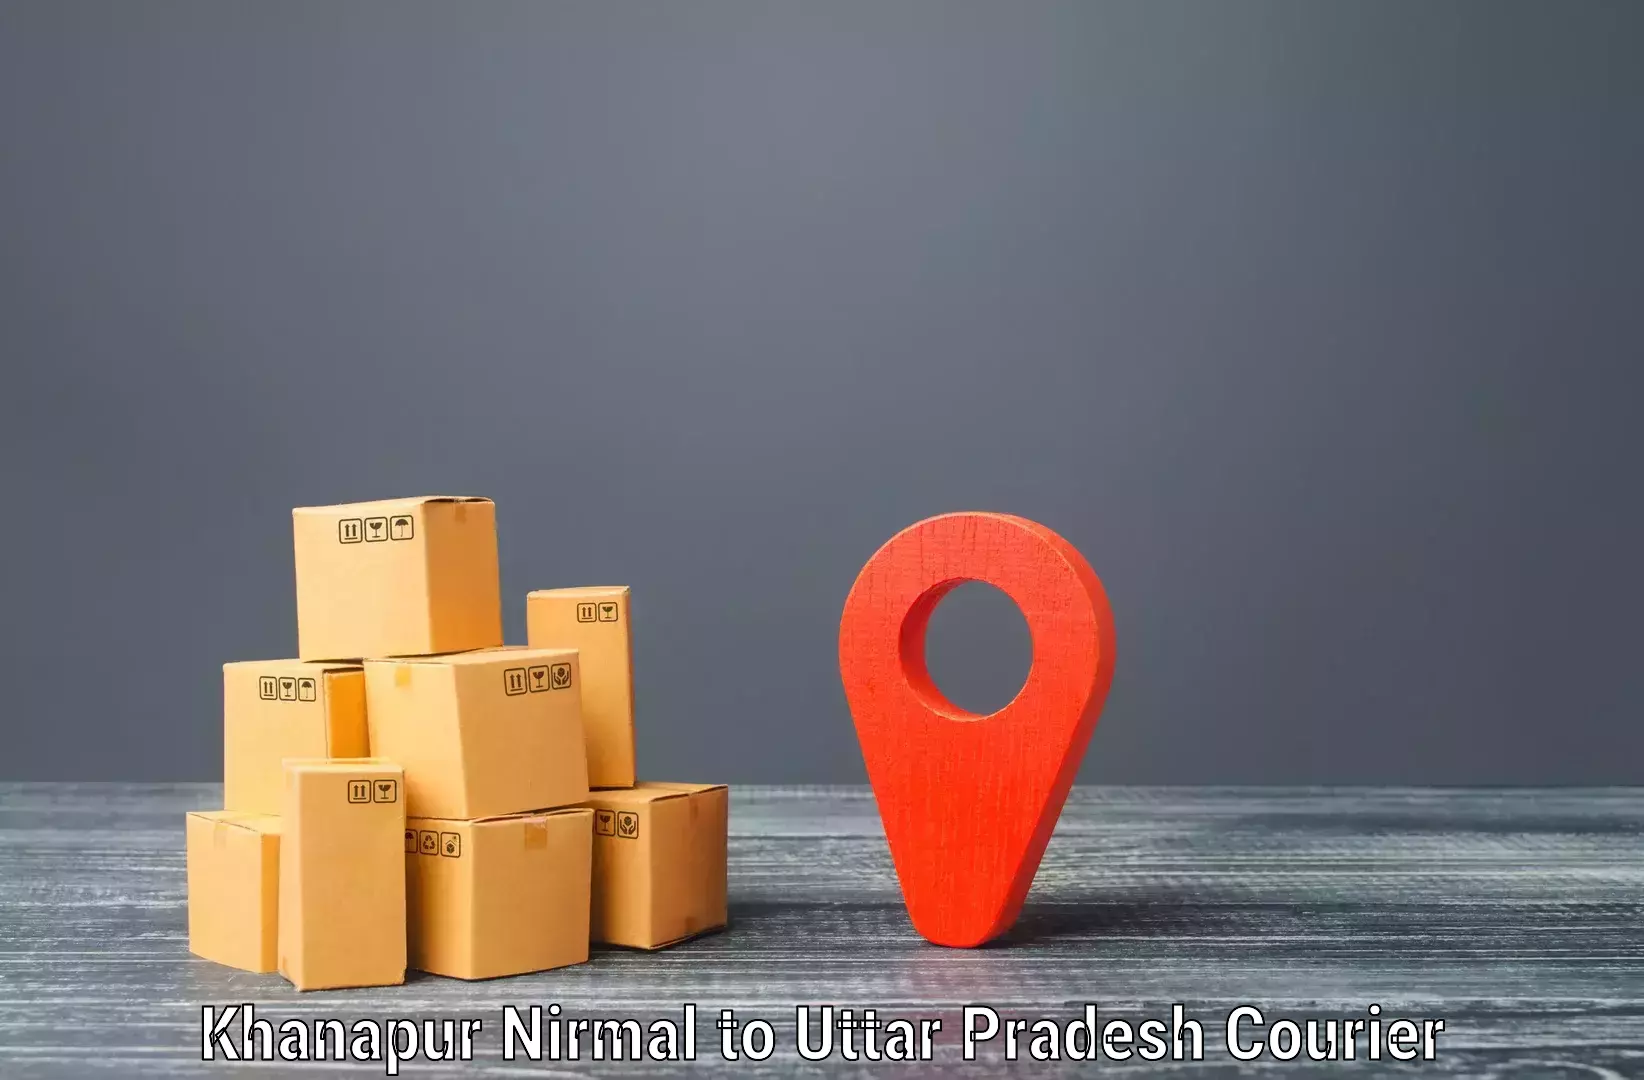 Automated parcel services Khanapur Nirmal to Tulsipur